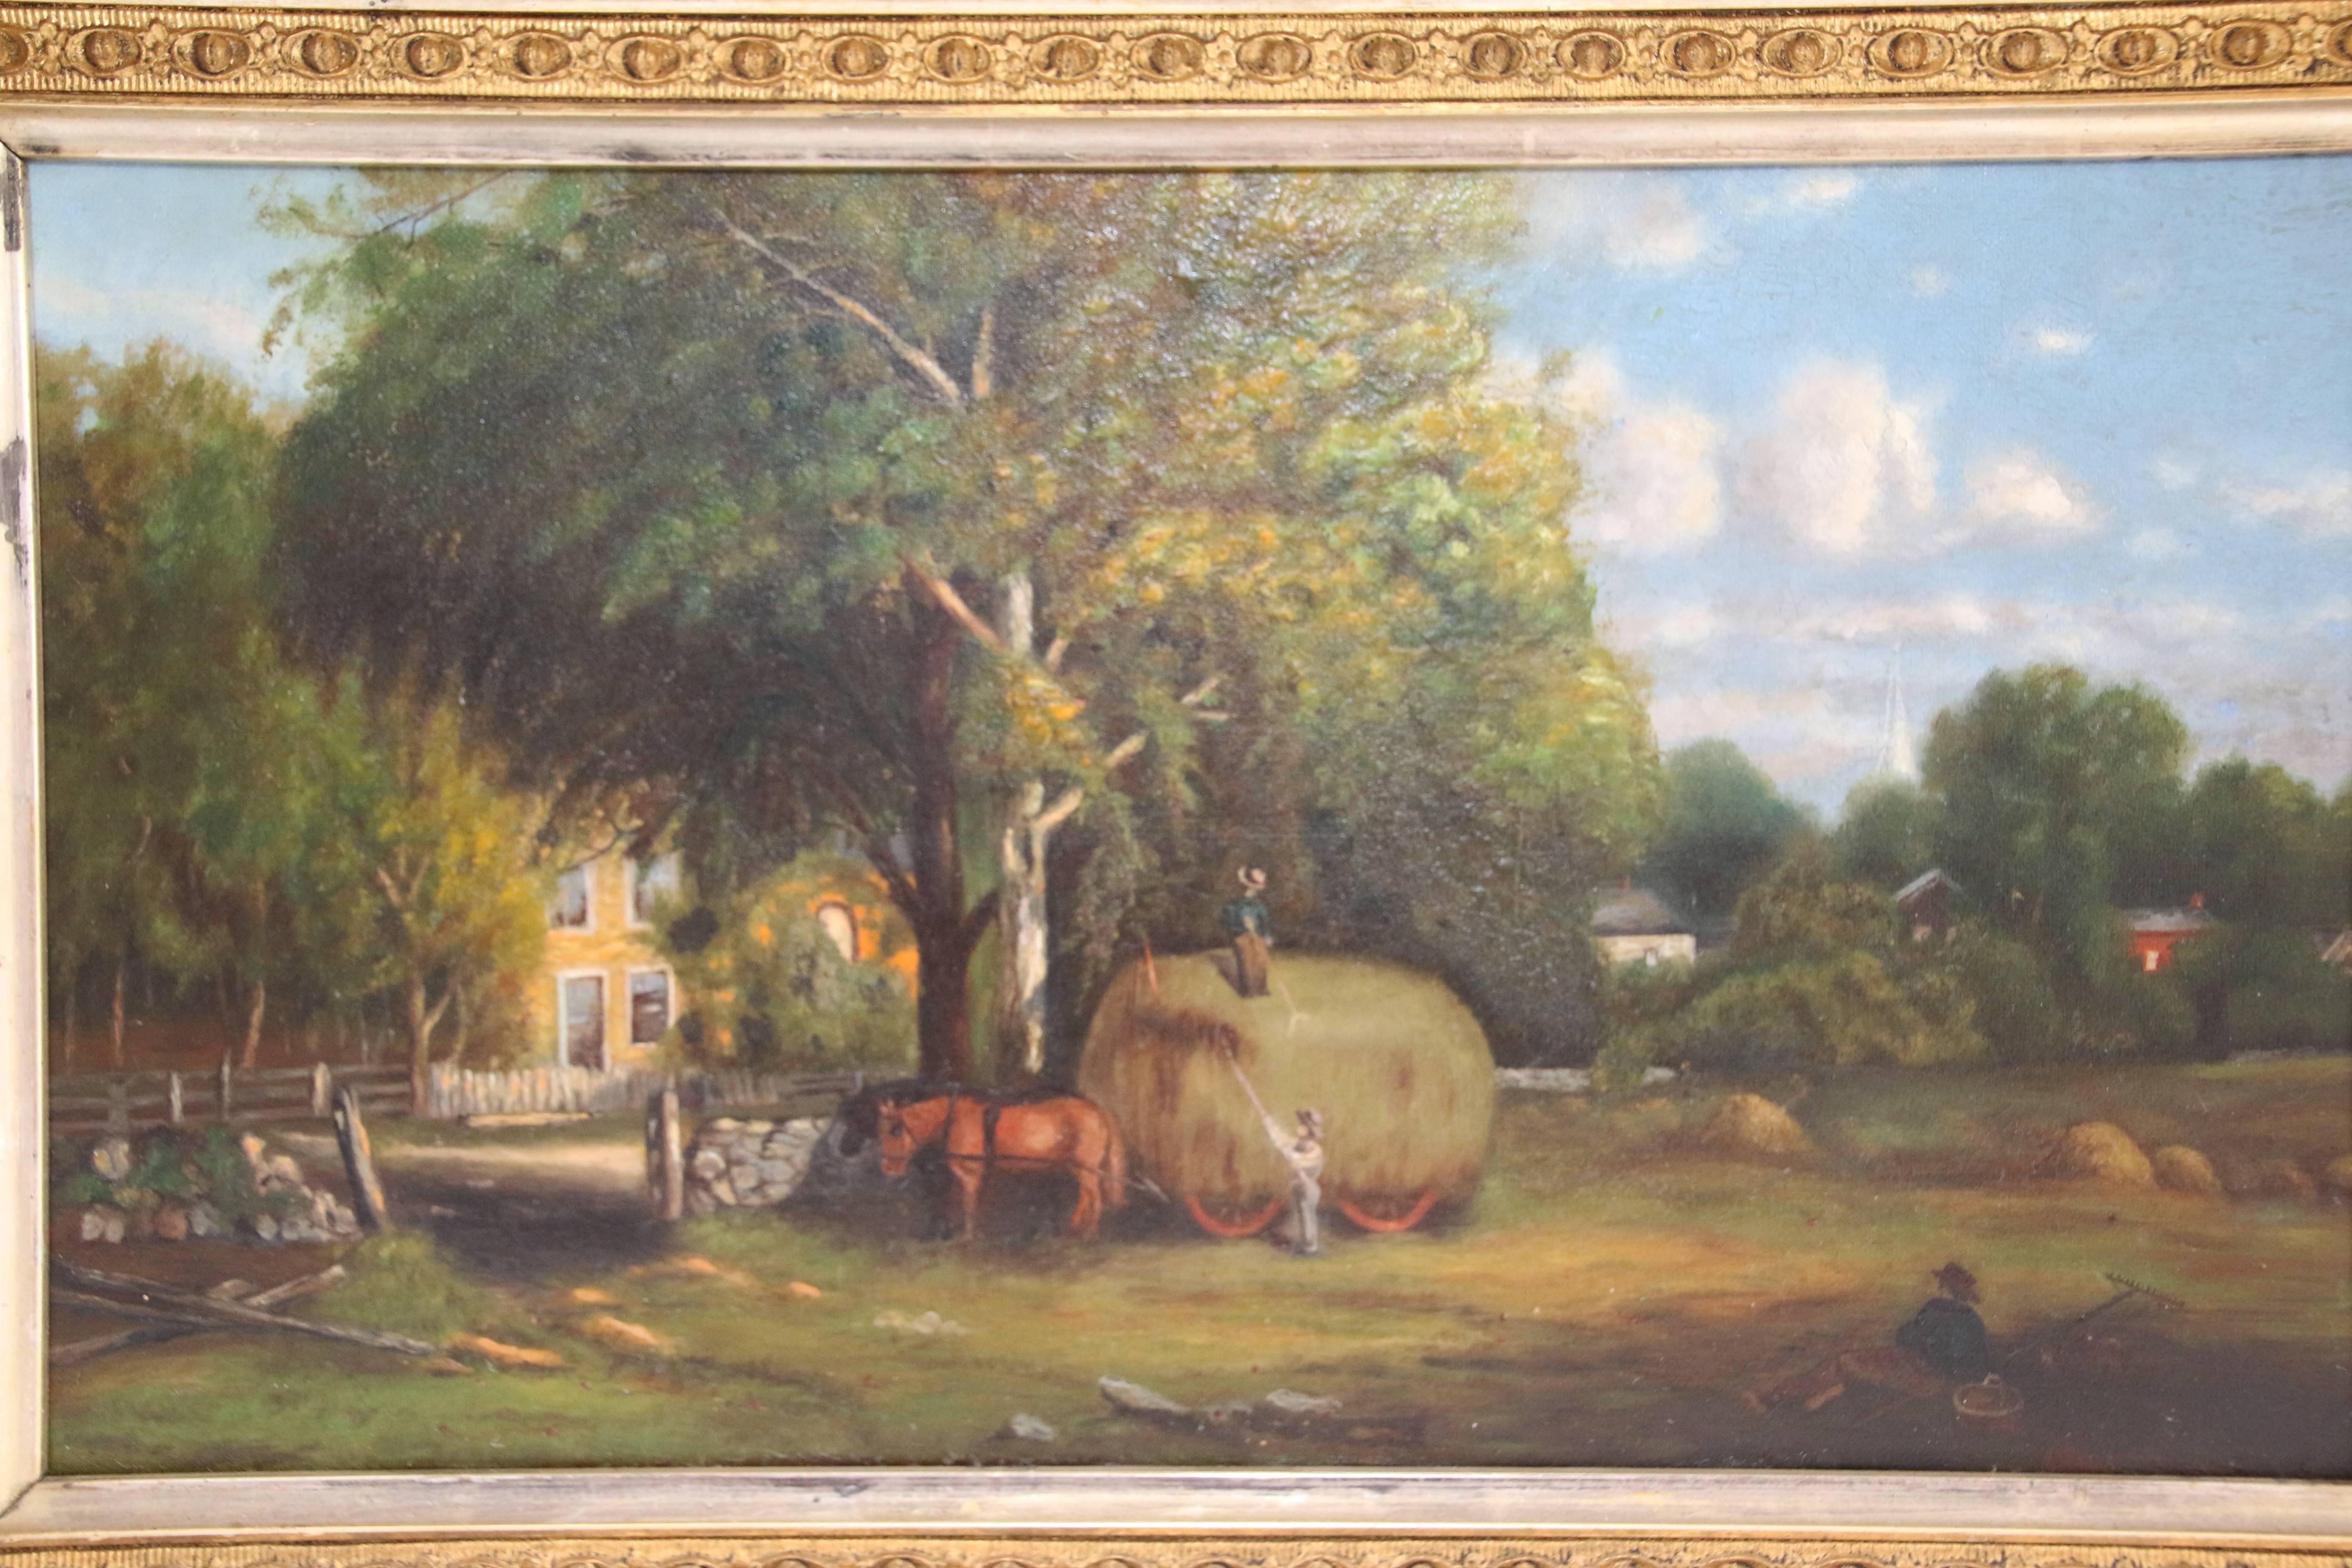 Late 19th century oil on canvas painting with bucolic farmstead and its environs near Stockbridge, Massachusetts. Labelled on verso: “Farm Scene-Near Stockbridge, Mass- 1875. Written on stretcher: “by Charles Drake”. 
 
 
Dimensions (with frame):